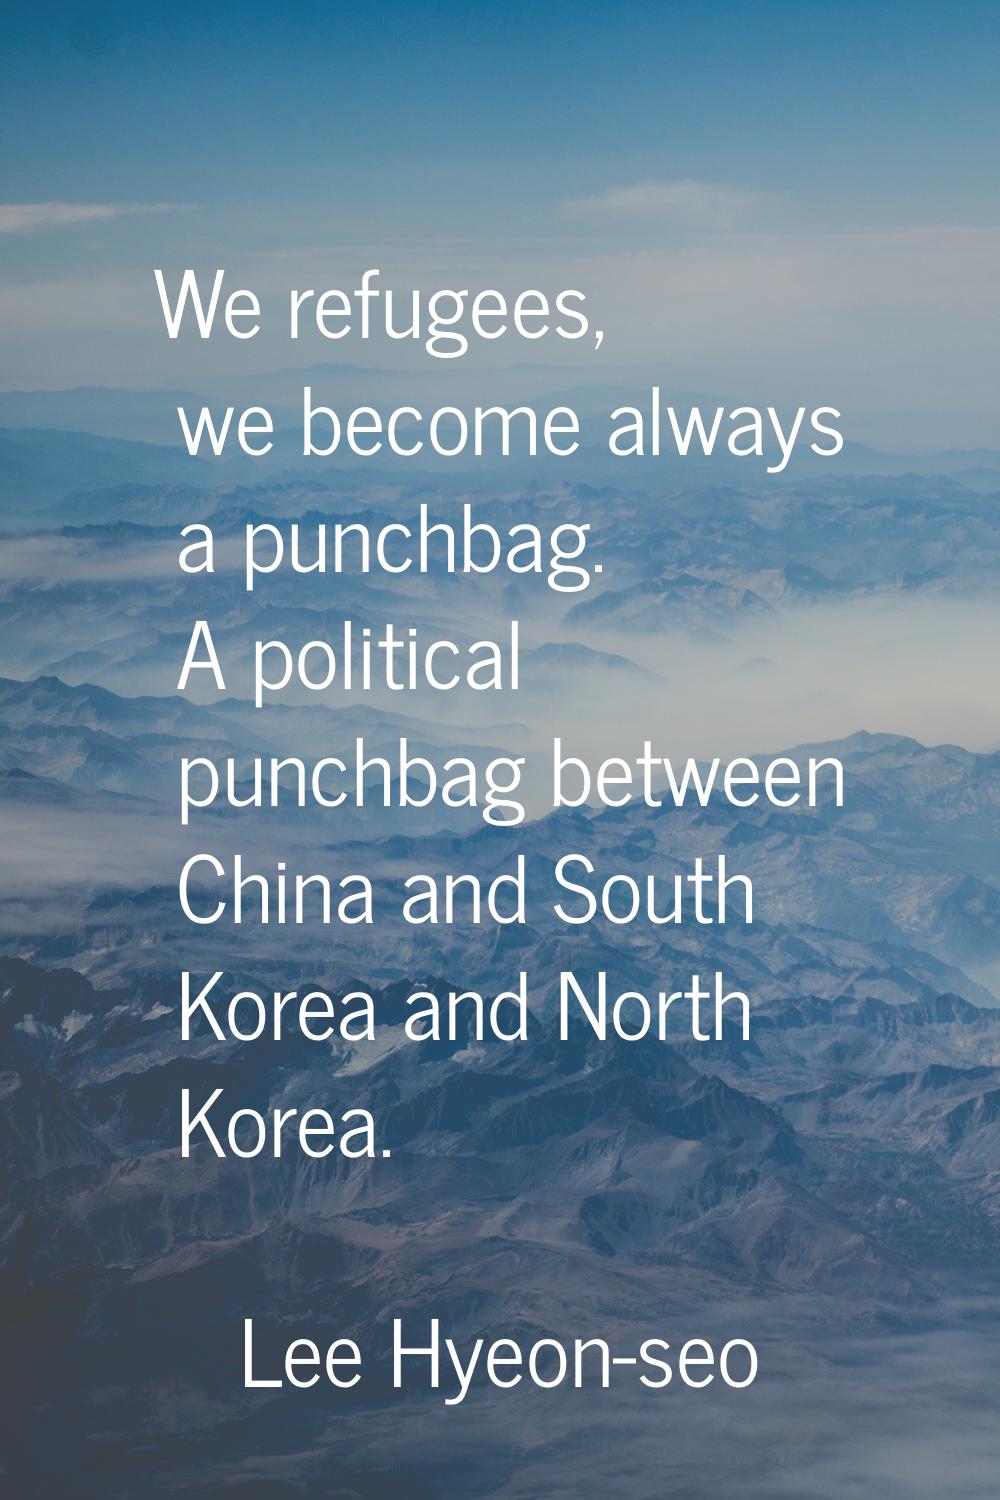 We refugees, we become always a punchbag. A political punchbag between China and South Korea and No